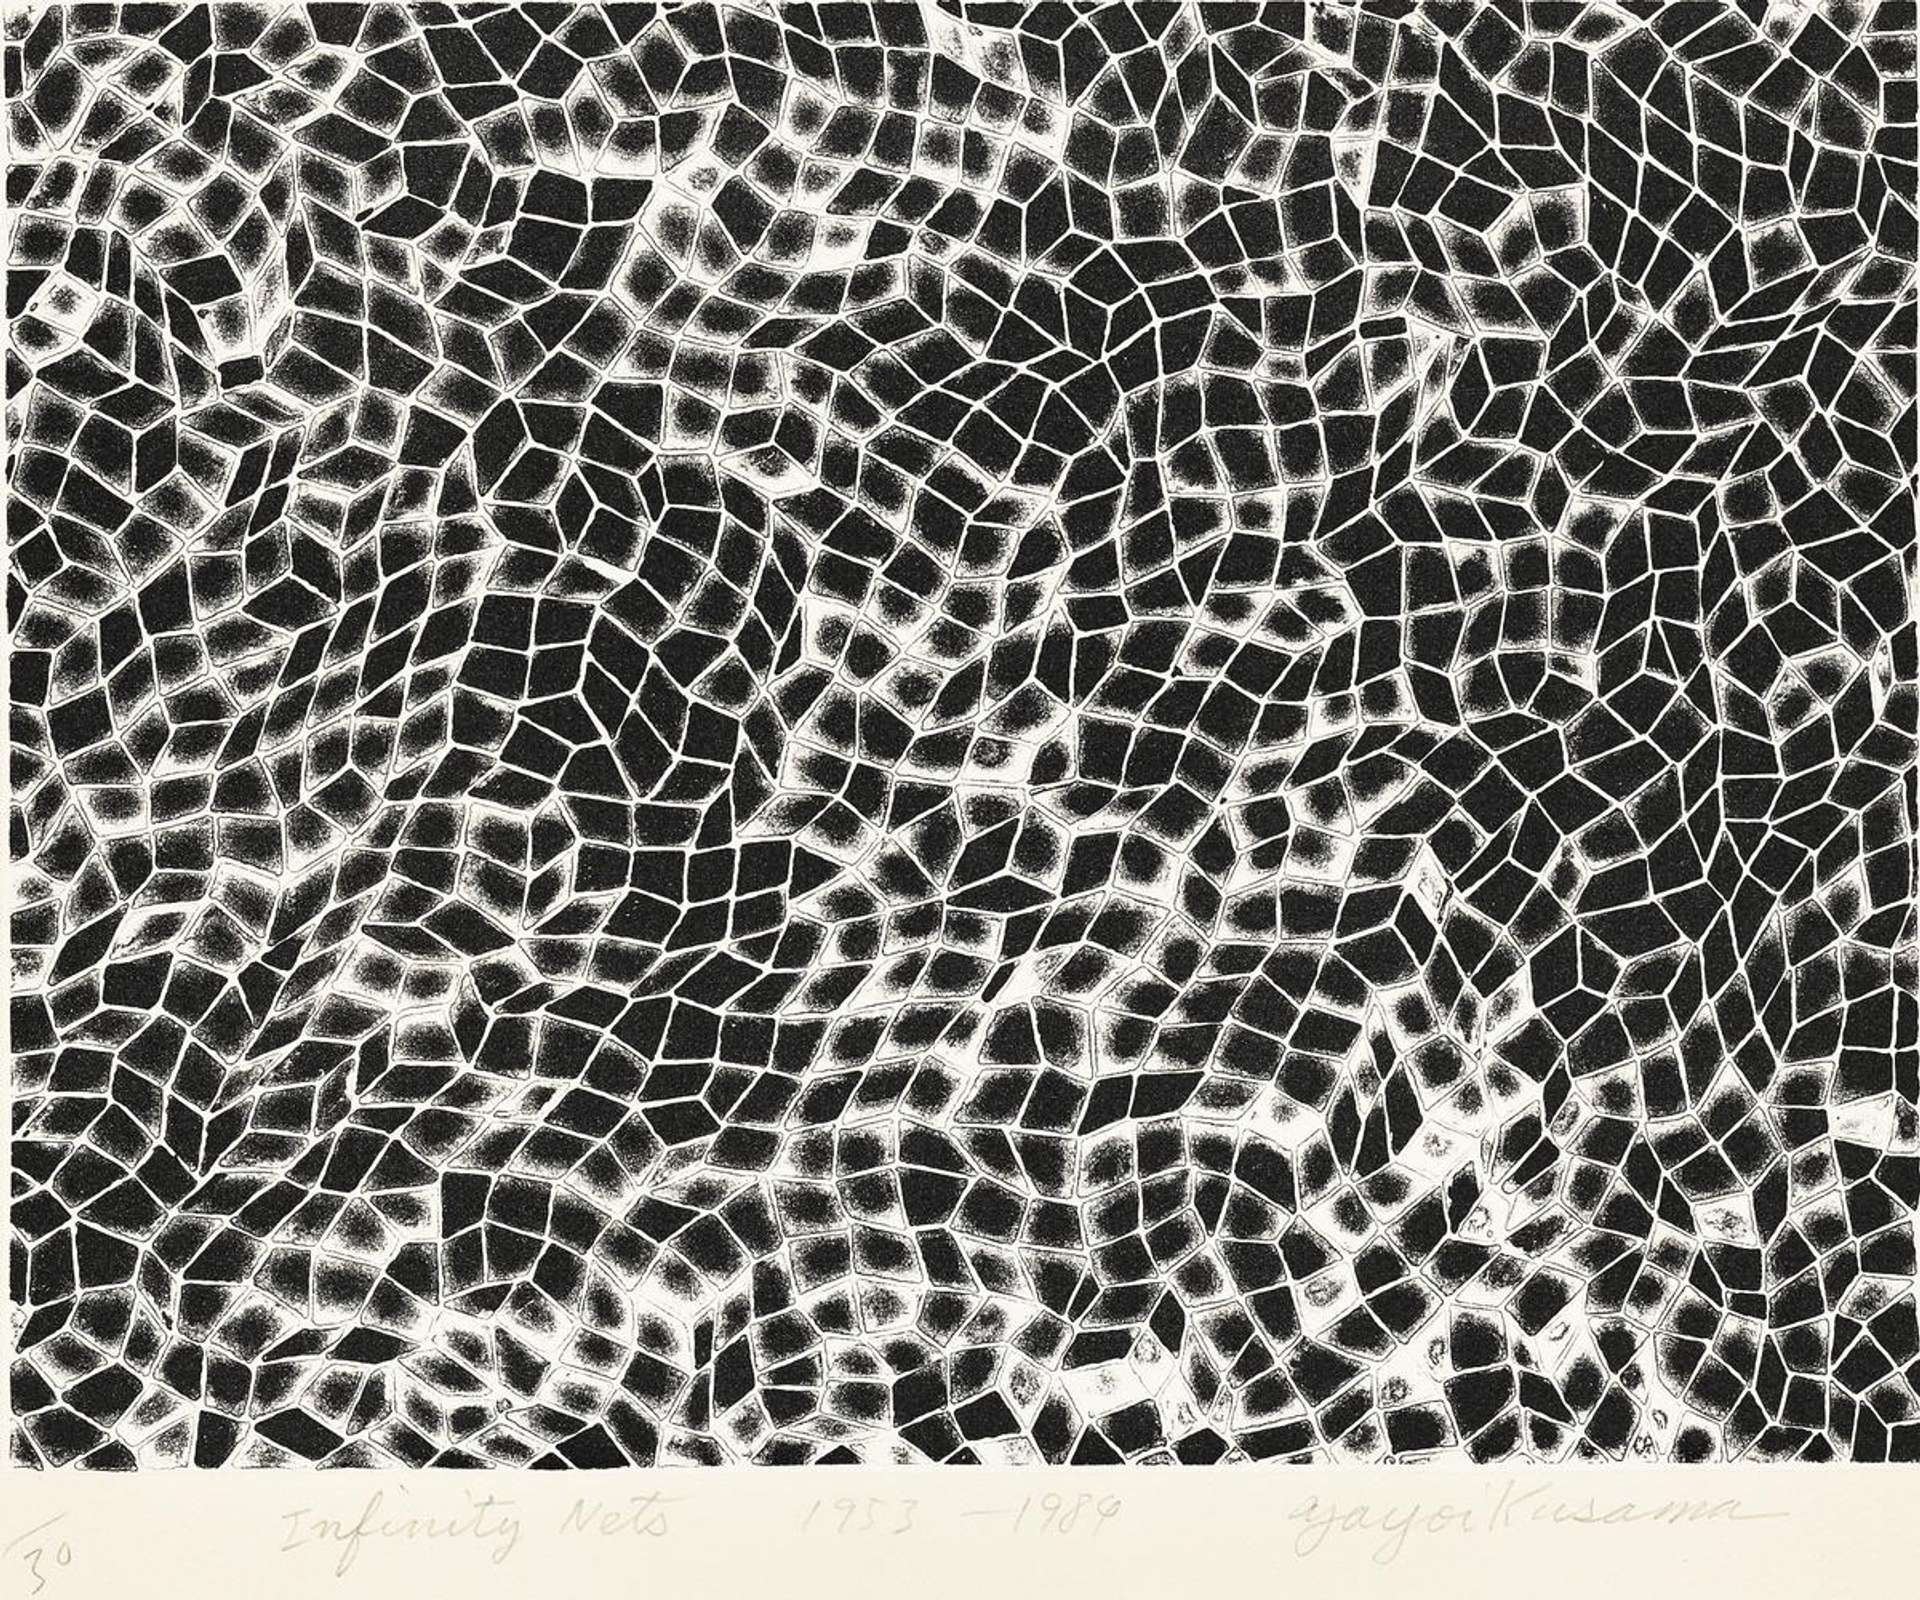 A lithograph print by Yayoi Kusama depicting a patter of ‘Infinity Nets’ in black and white